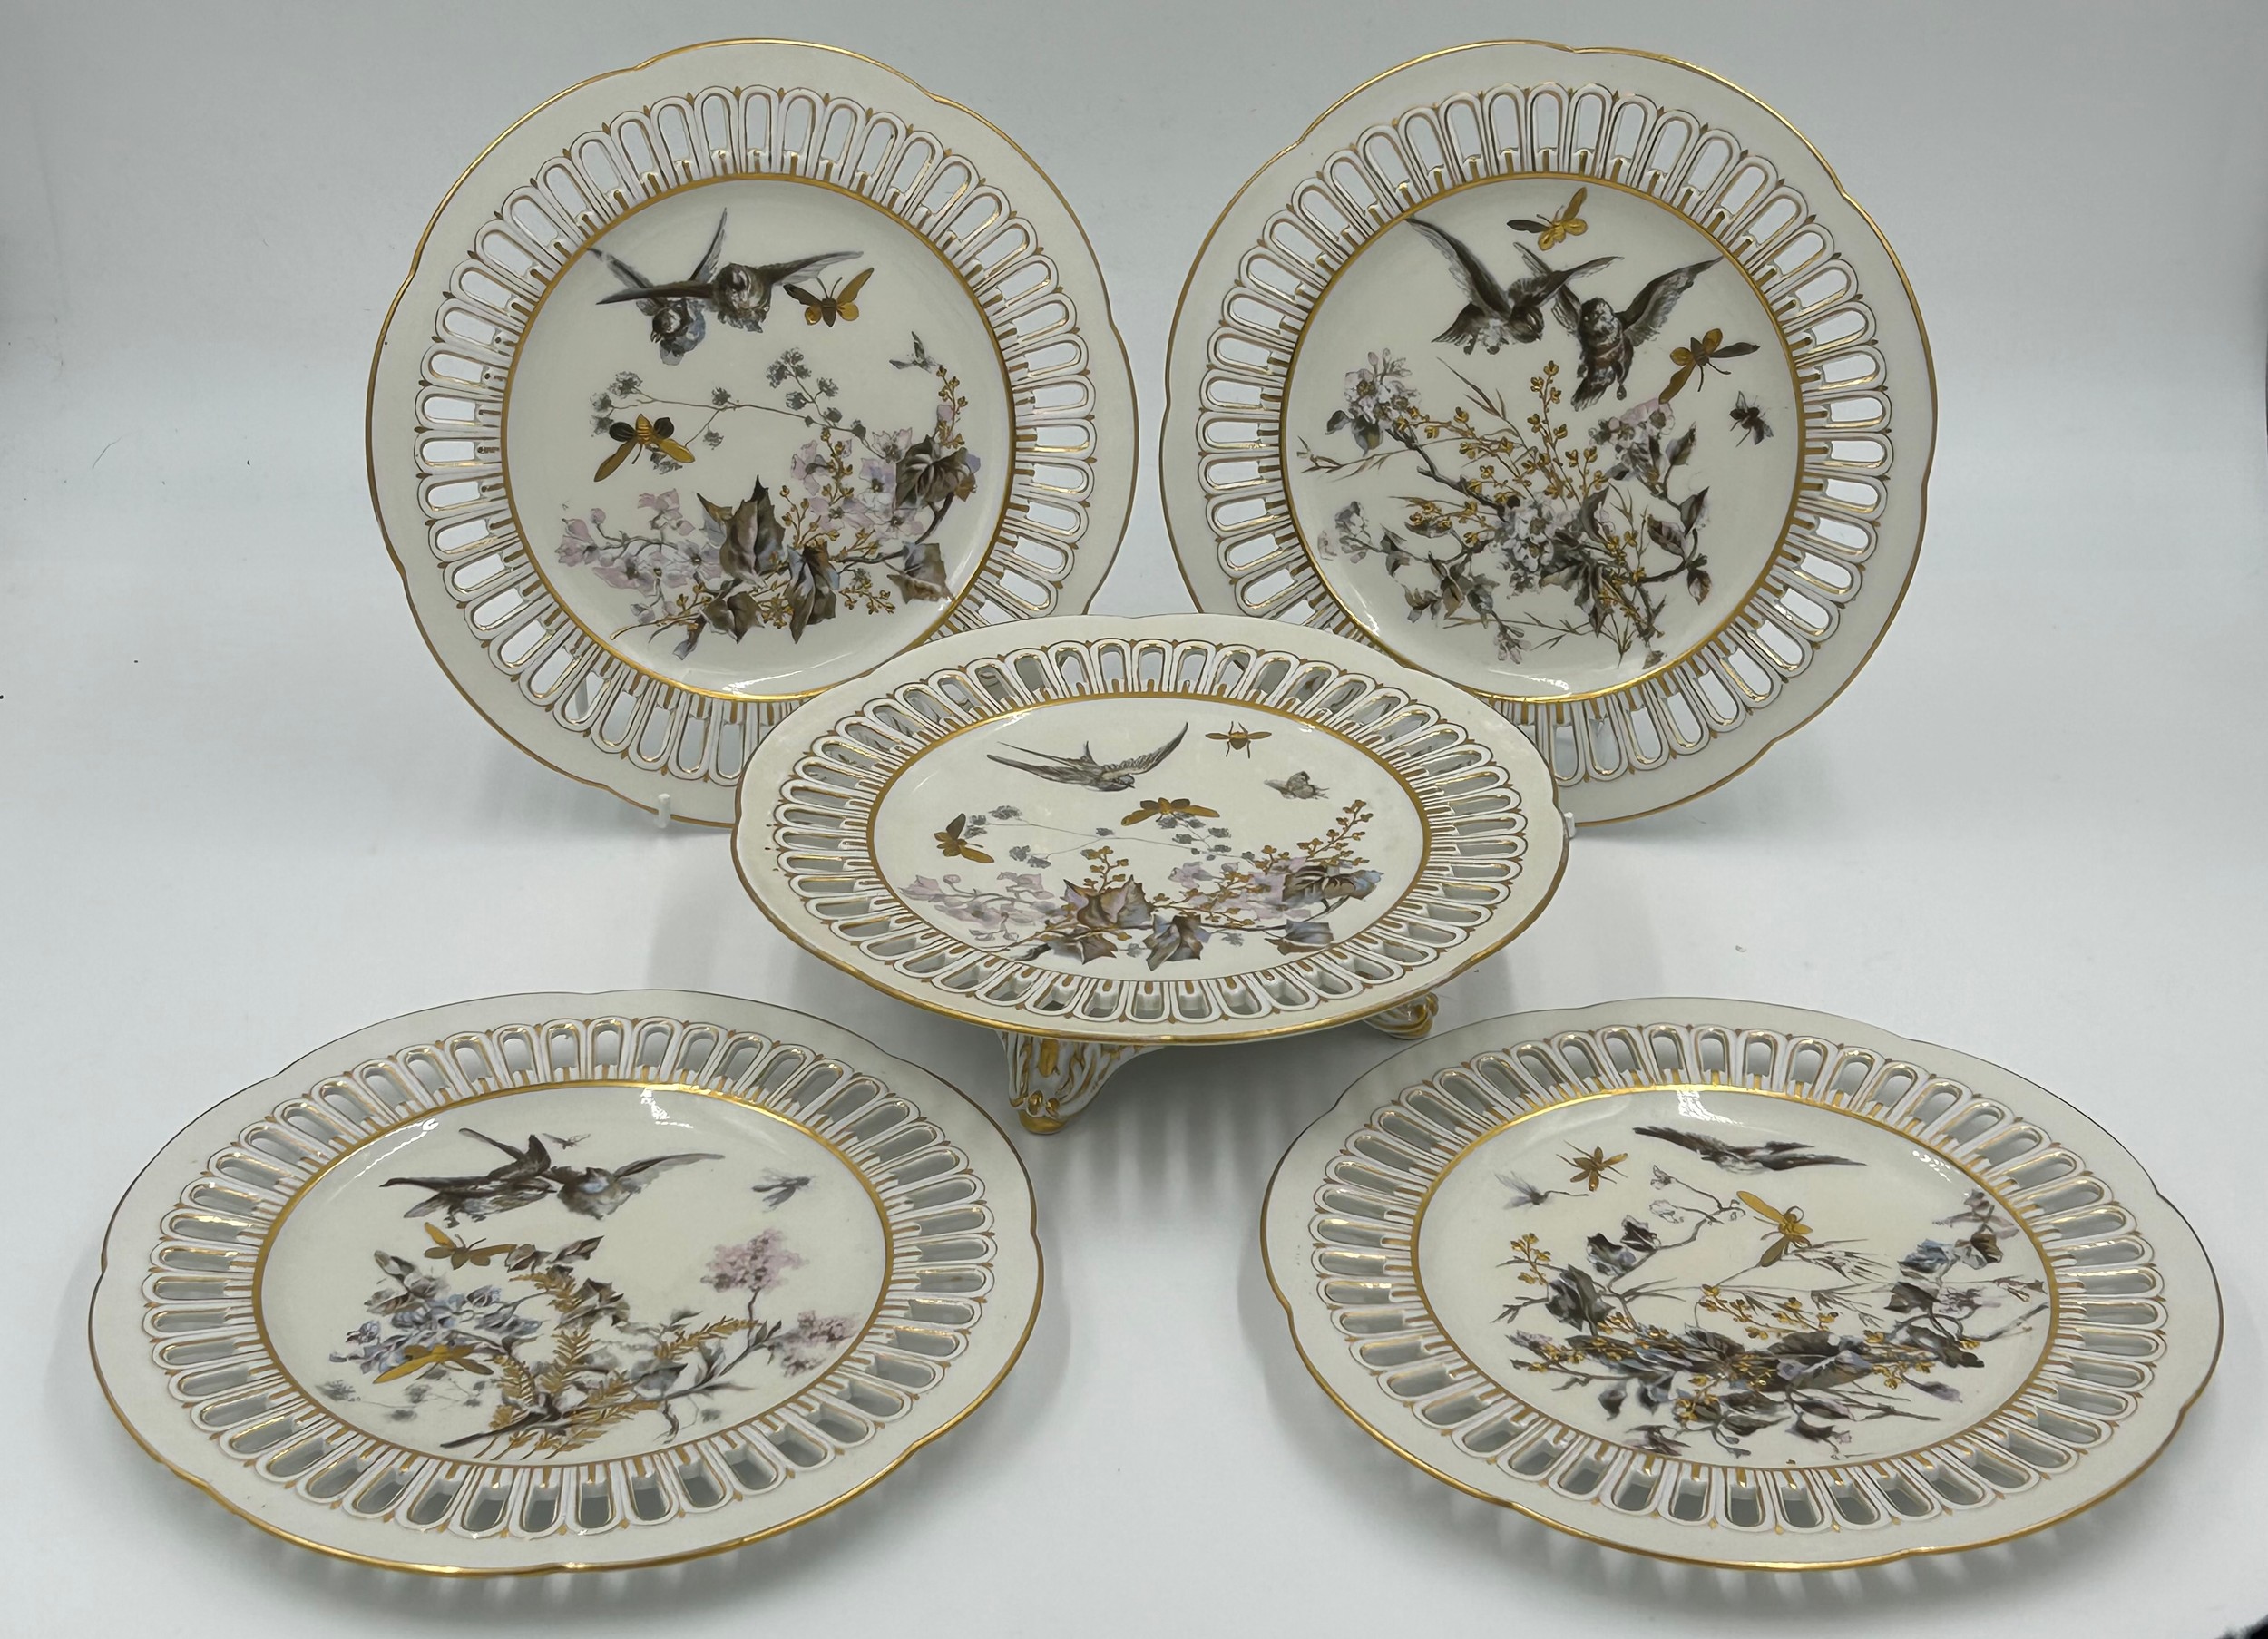 Fischer & Mieg 19thC porcelain part tea service, with ribbon borders, floral, bird and gold insect